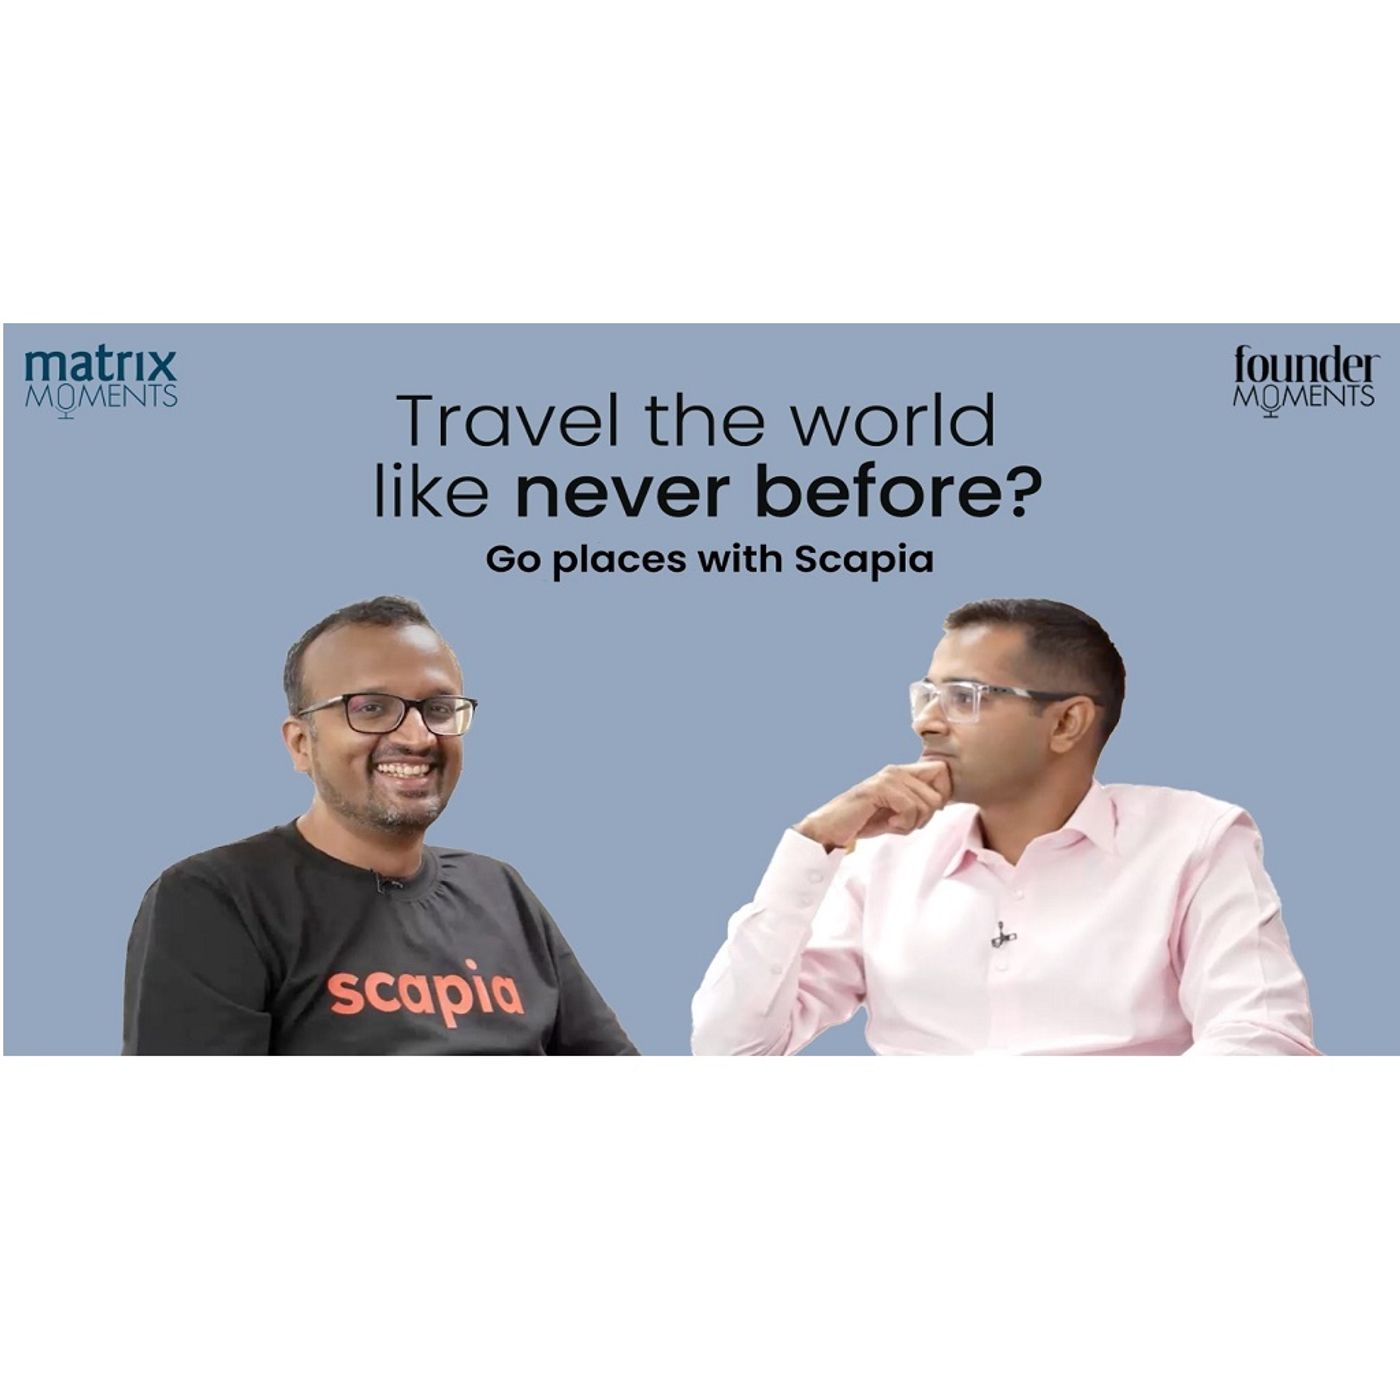 172: Matrix Moments: Anil Goteti, Founder of Scapia on building a travel fintech company